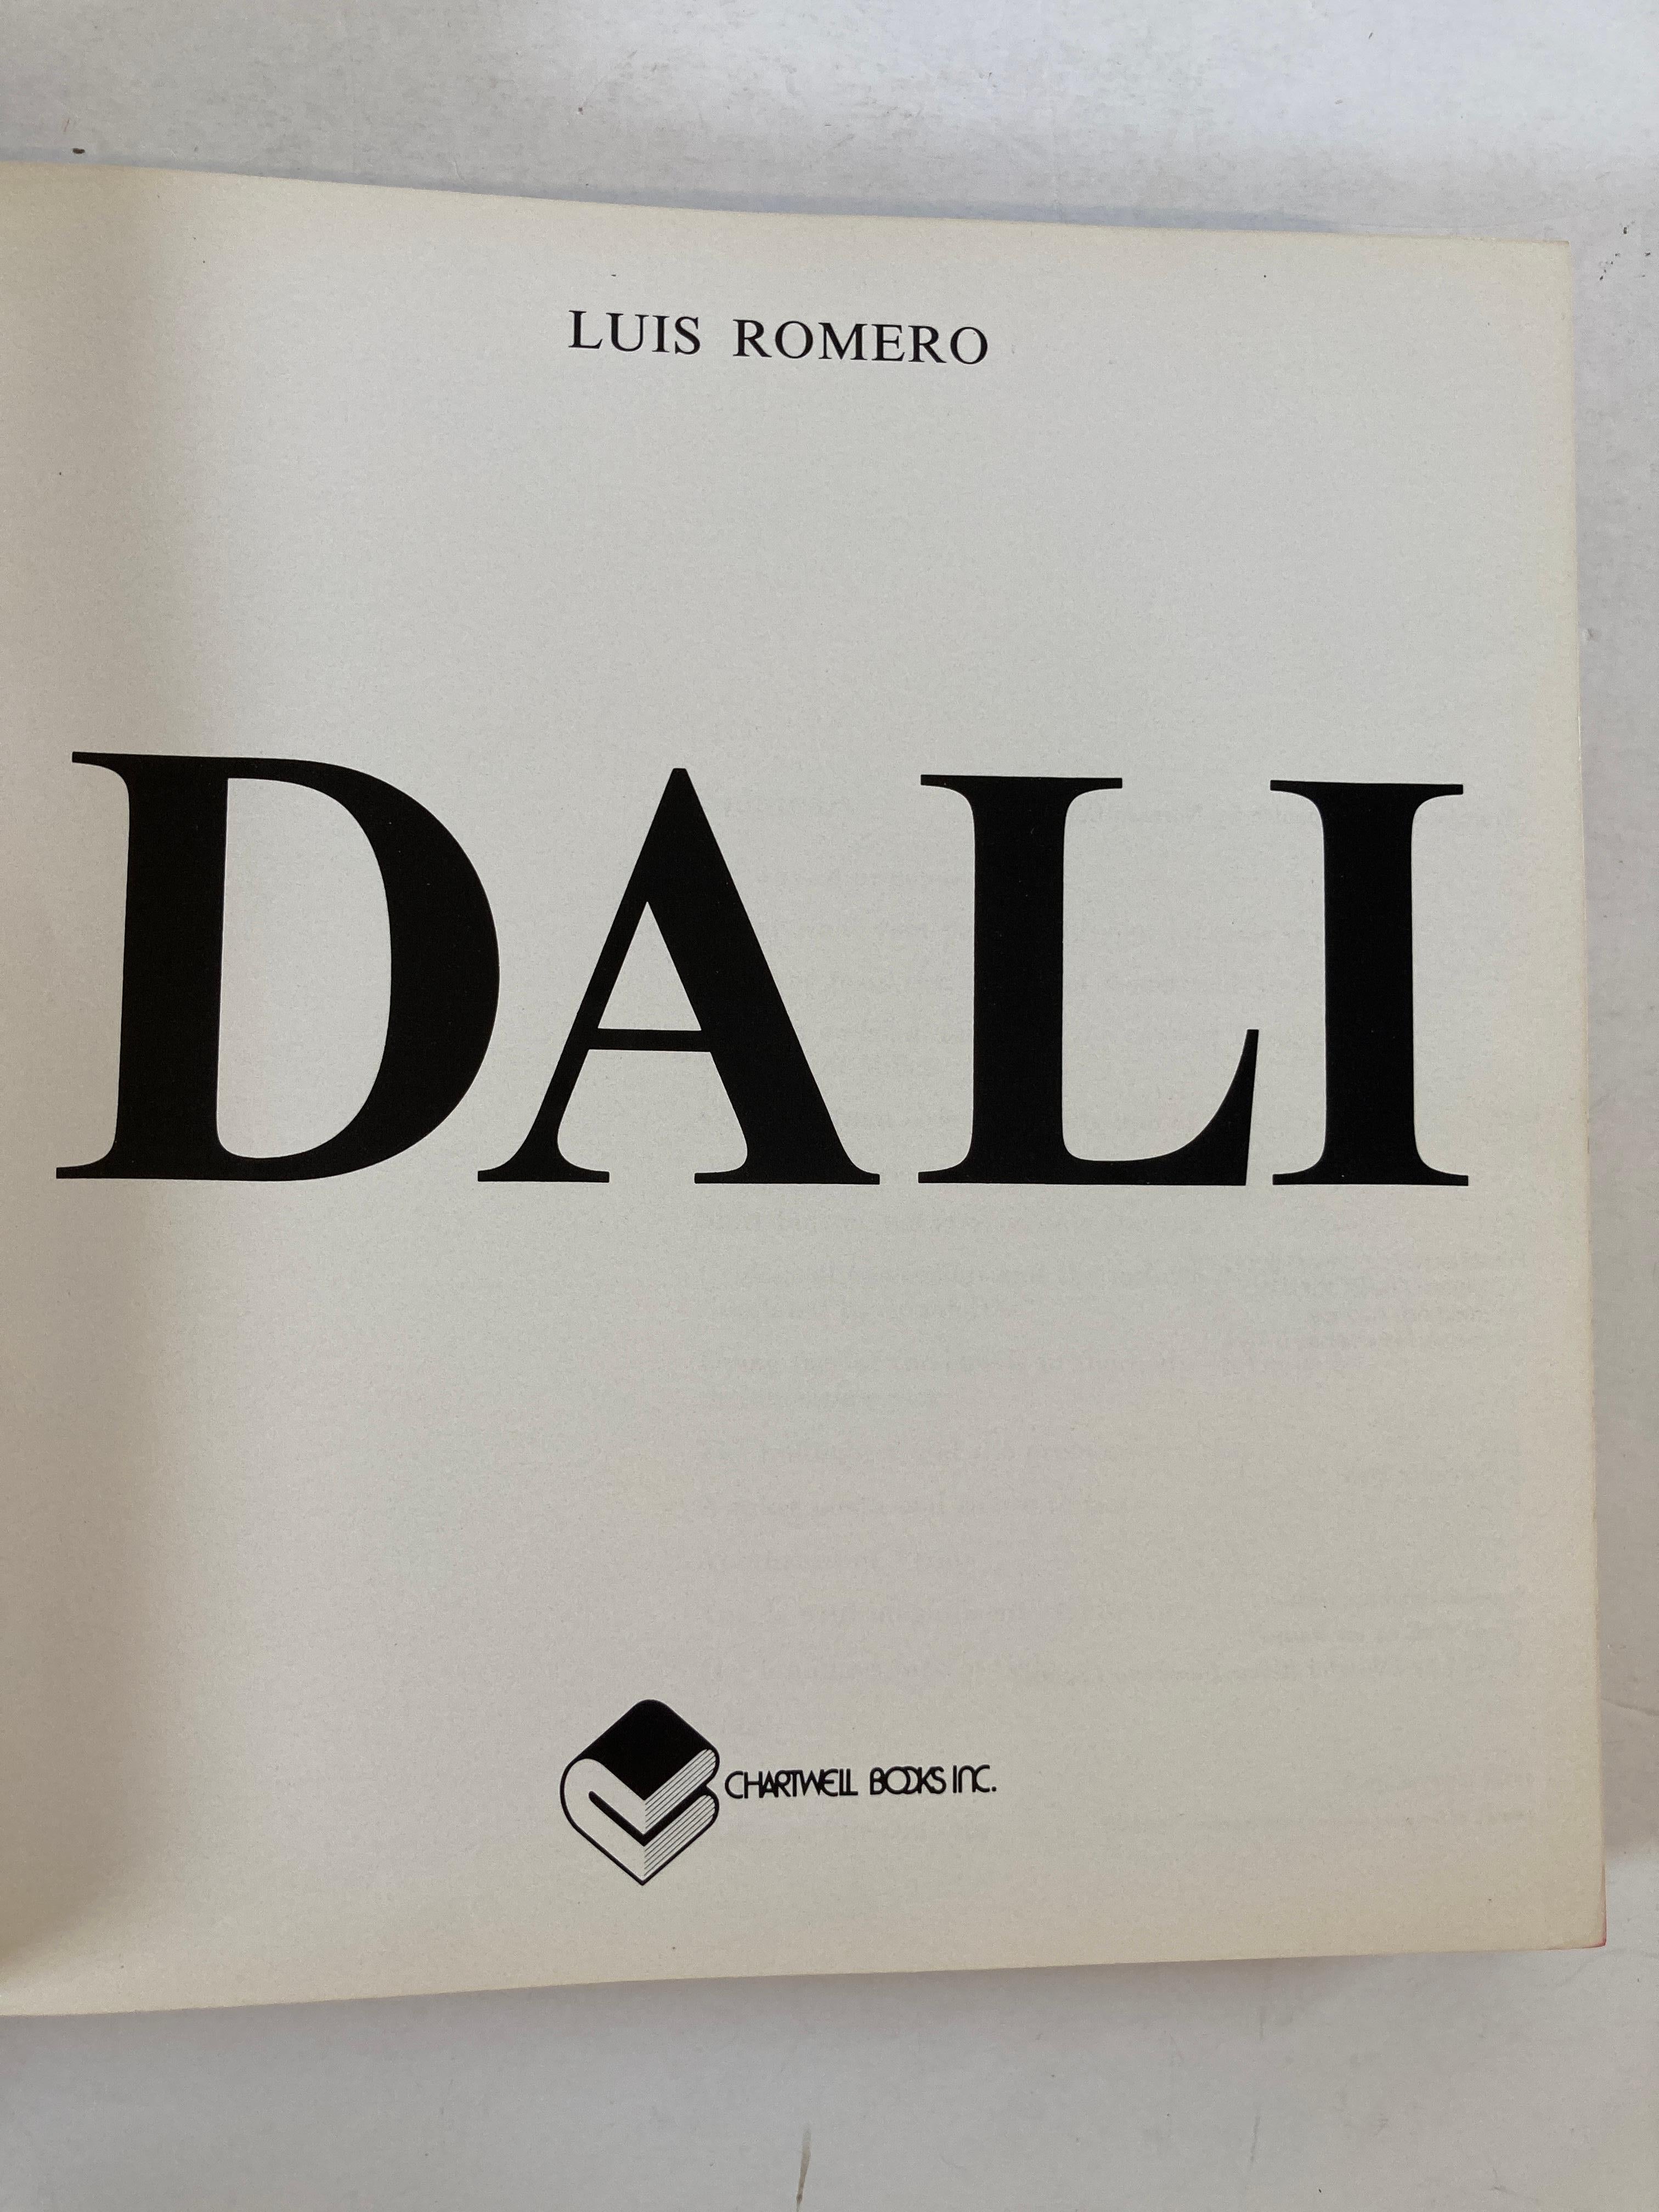 Dali Biography of Salvador Dali by Luis Romero Art Book In Good Condition For Sale In North Hollywood, CA